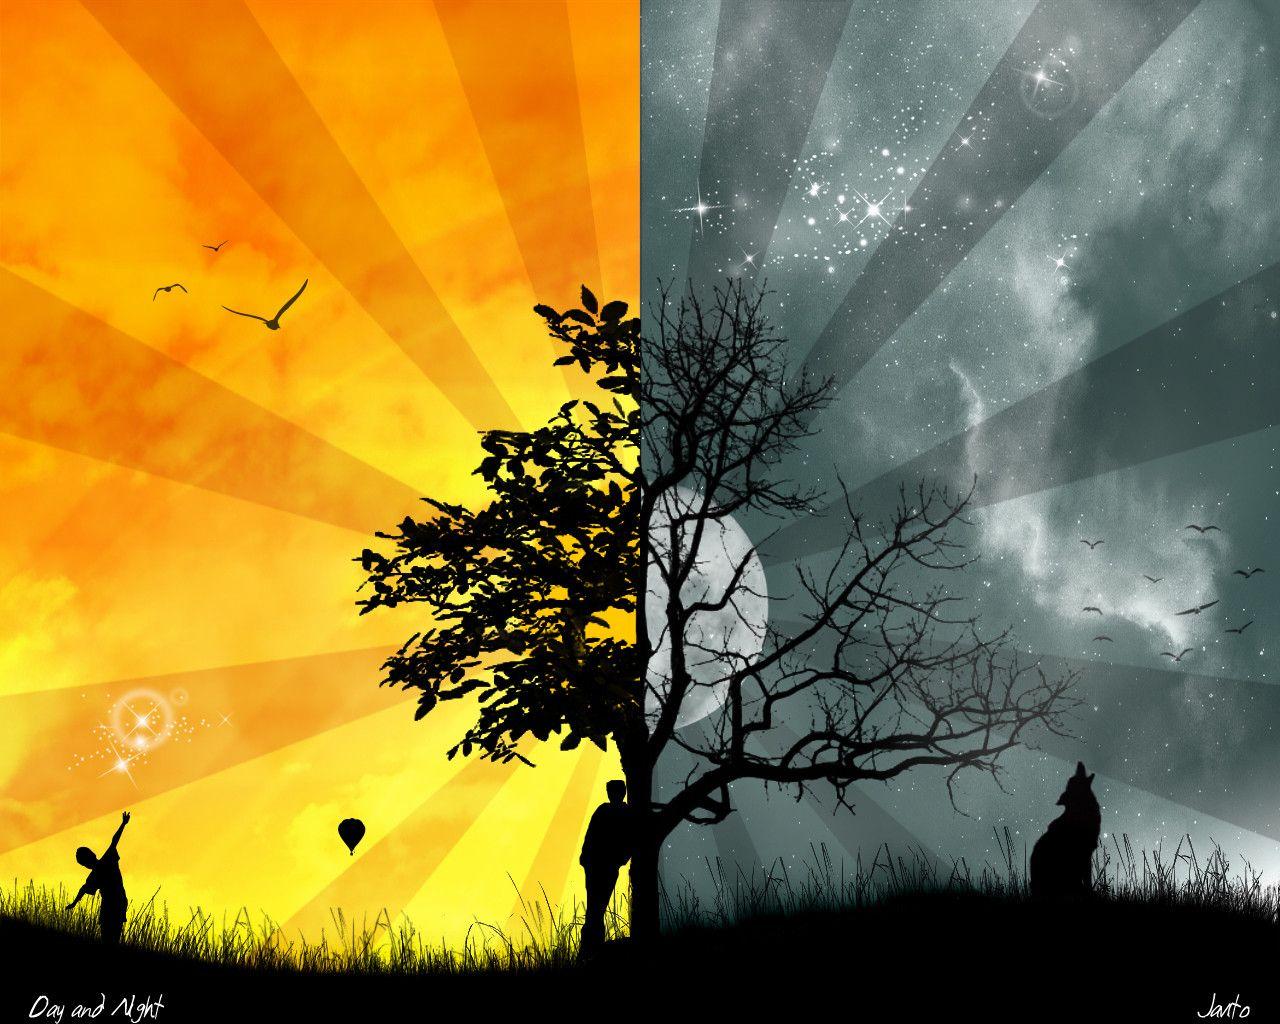 Day and night cartoon daytime phone wallpaper Vector Image